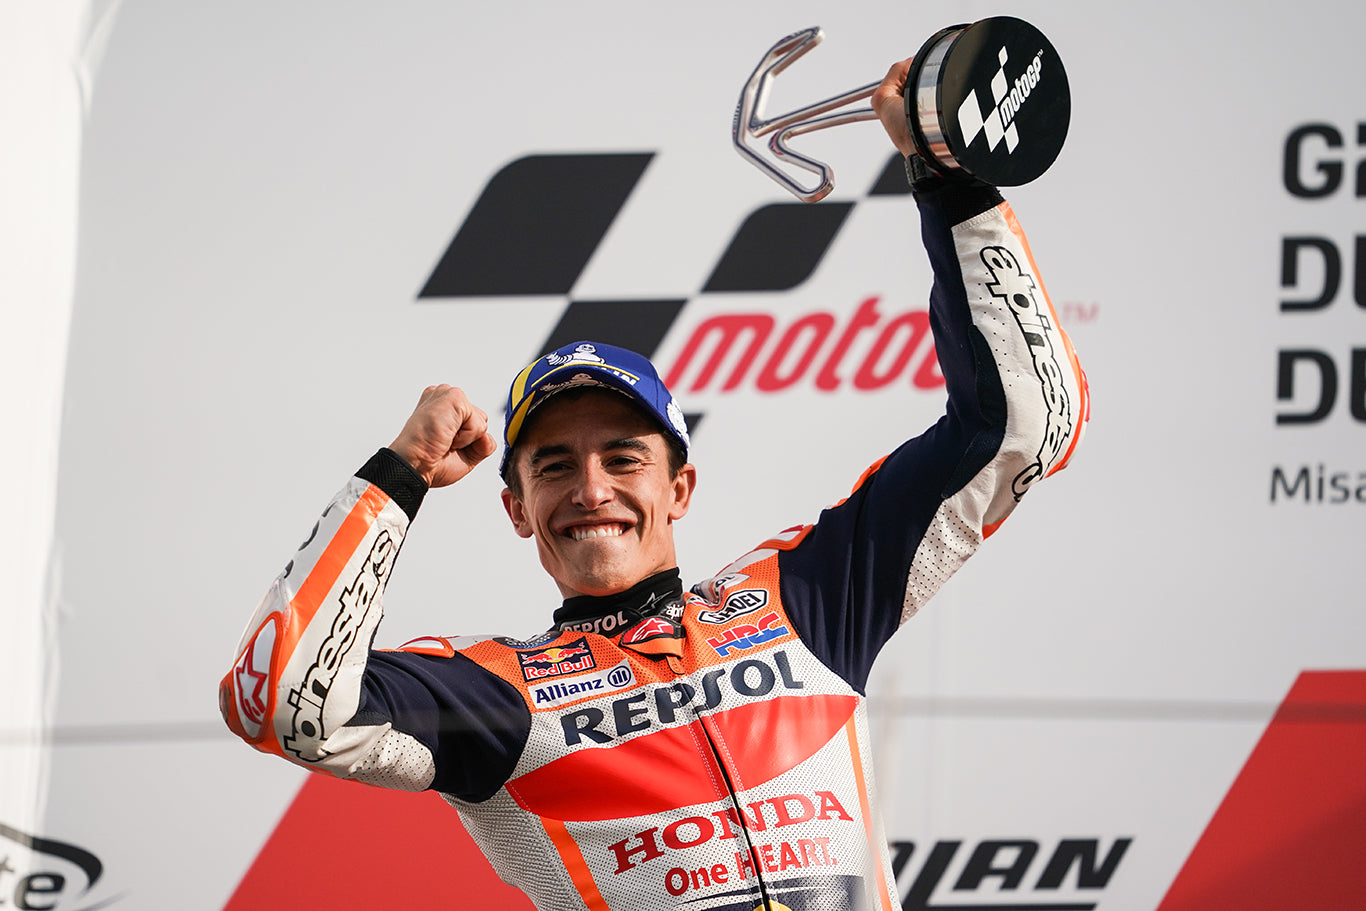 MARC MARQUEZ WINS MOTOGP RACE AT MISANO; ENEA BASTIANINI POWERS THROUGH THE FIELD TO SNATCH THIRD